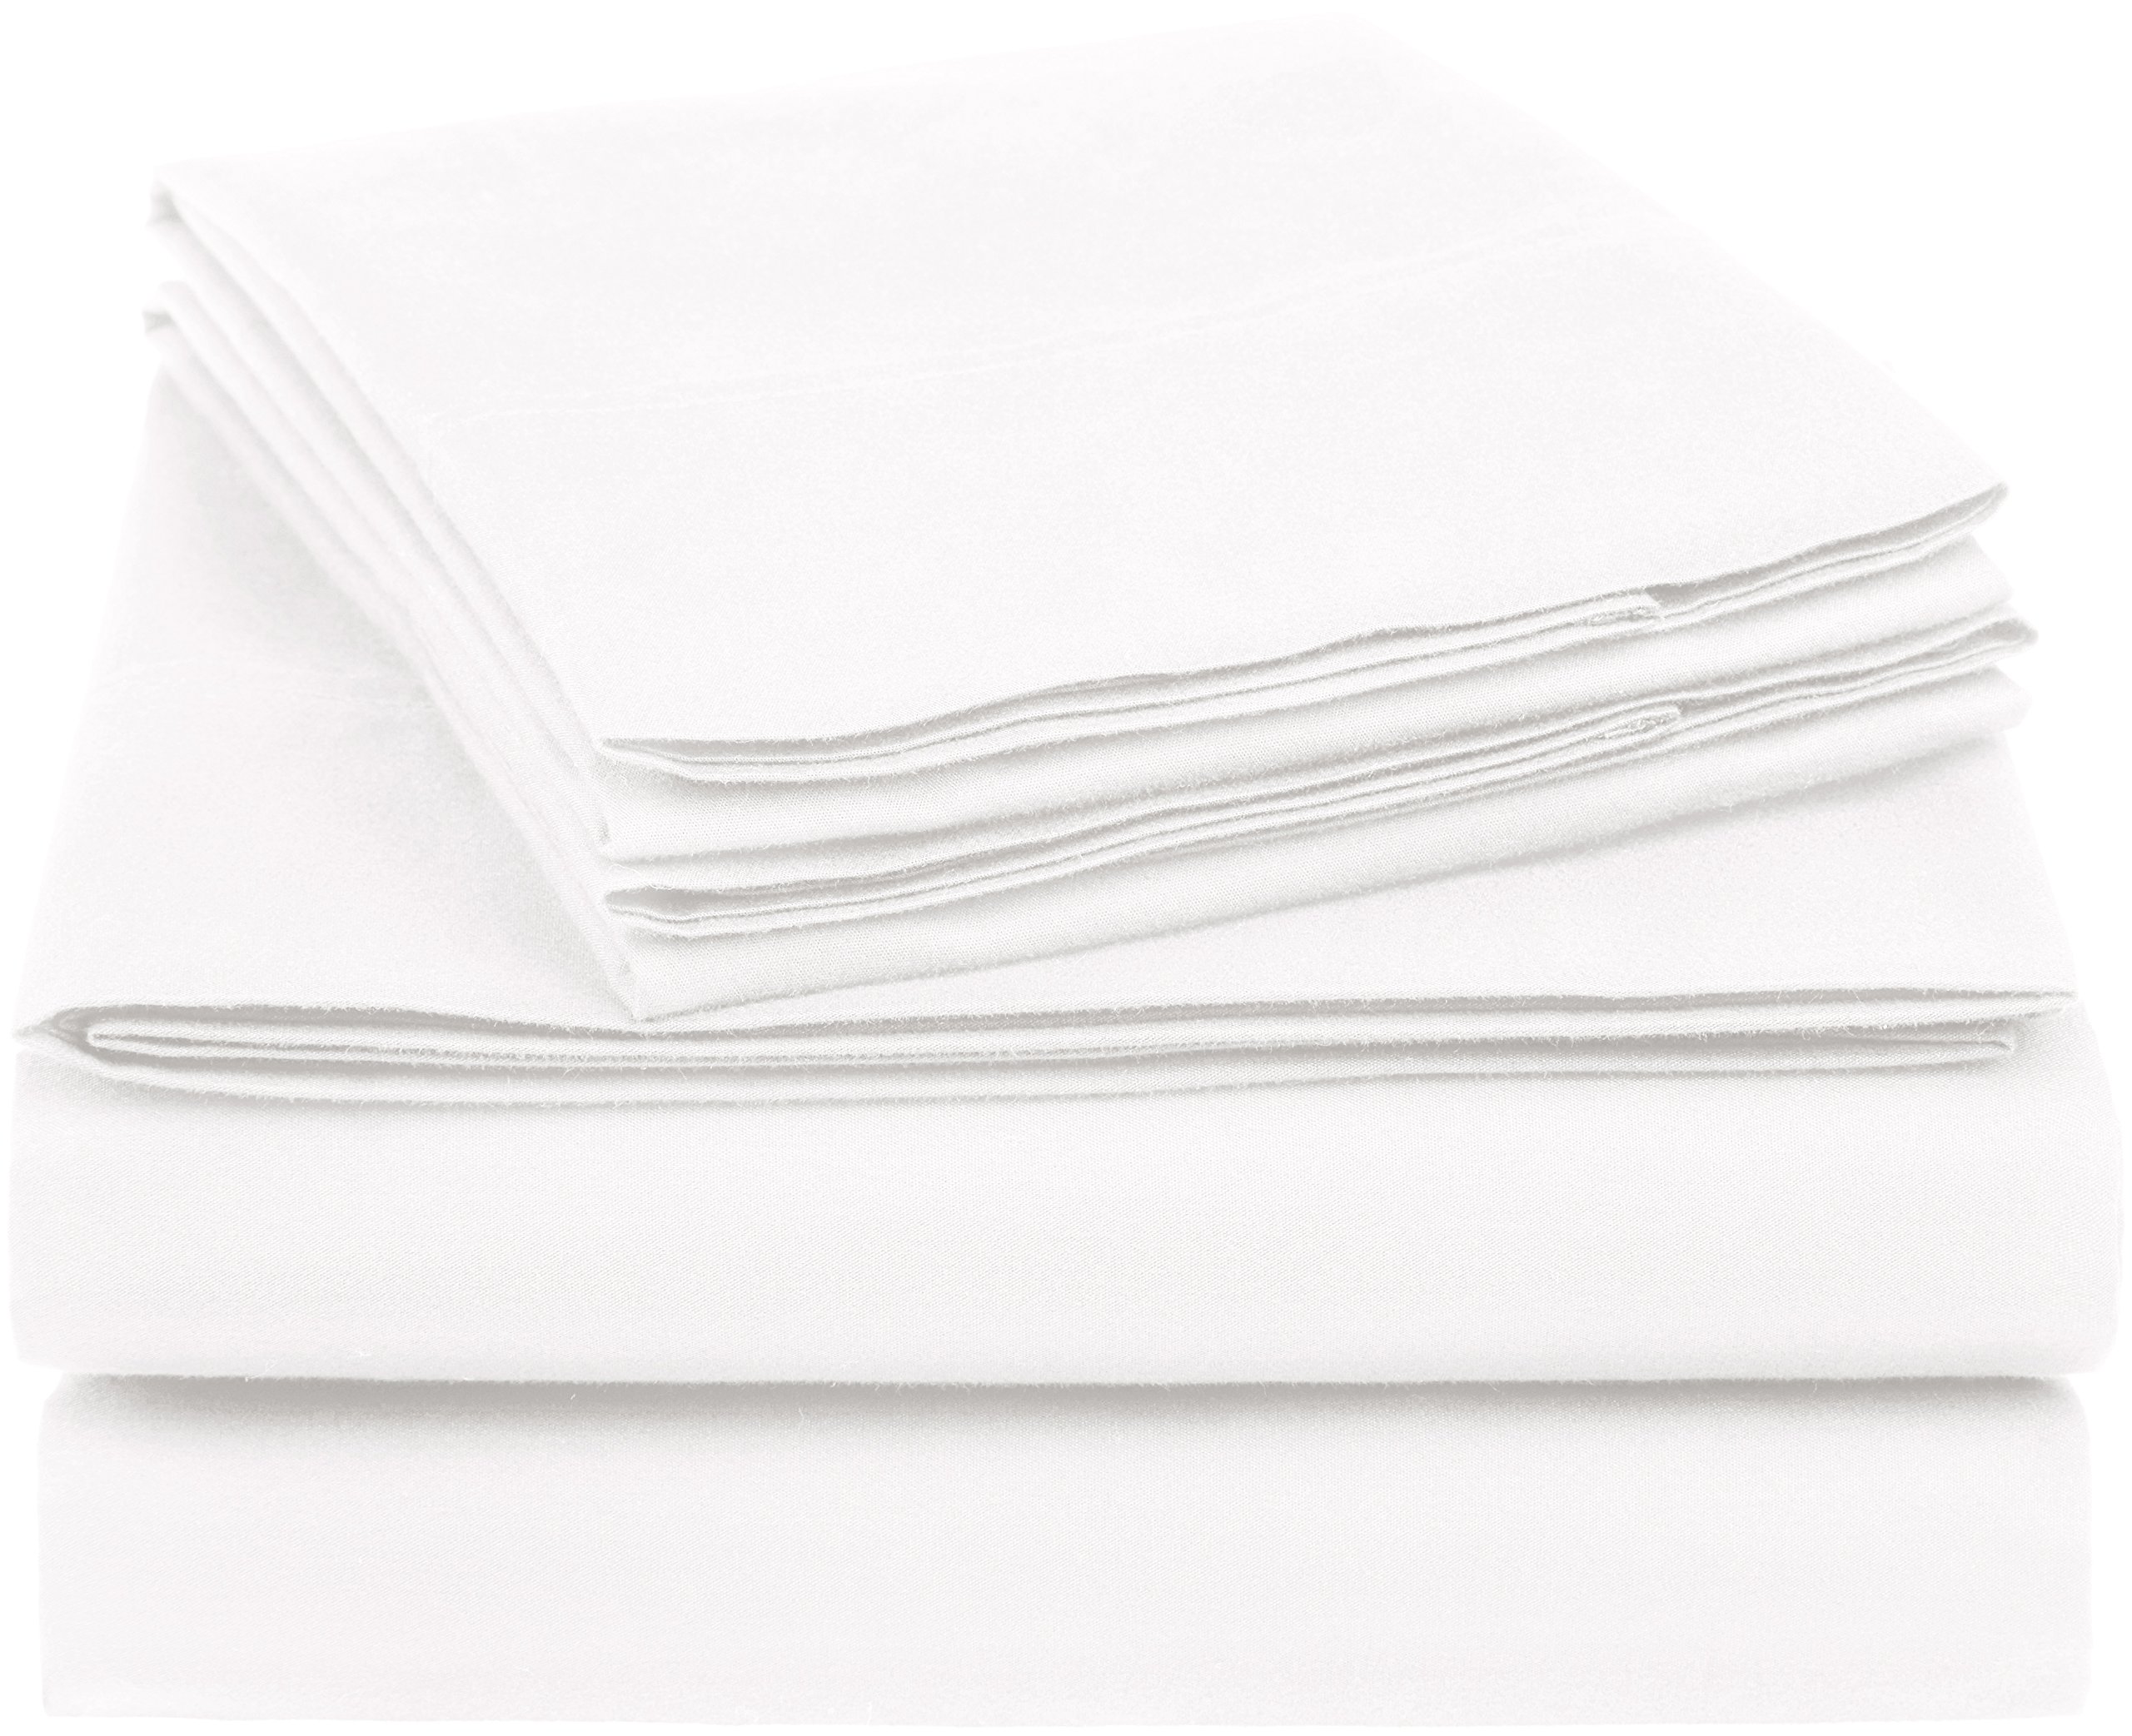 Book Cover Amazon Basics Essential Cotton Blend Bed Sheet Set,3 pieces, Full, White White Full